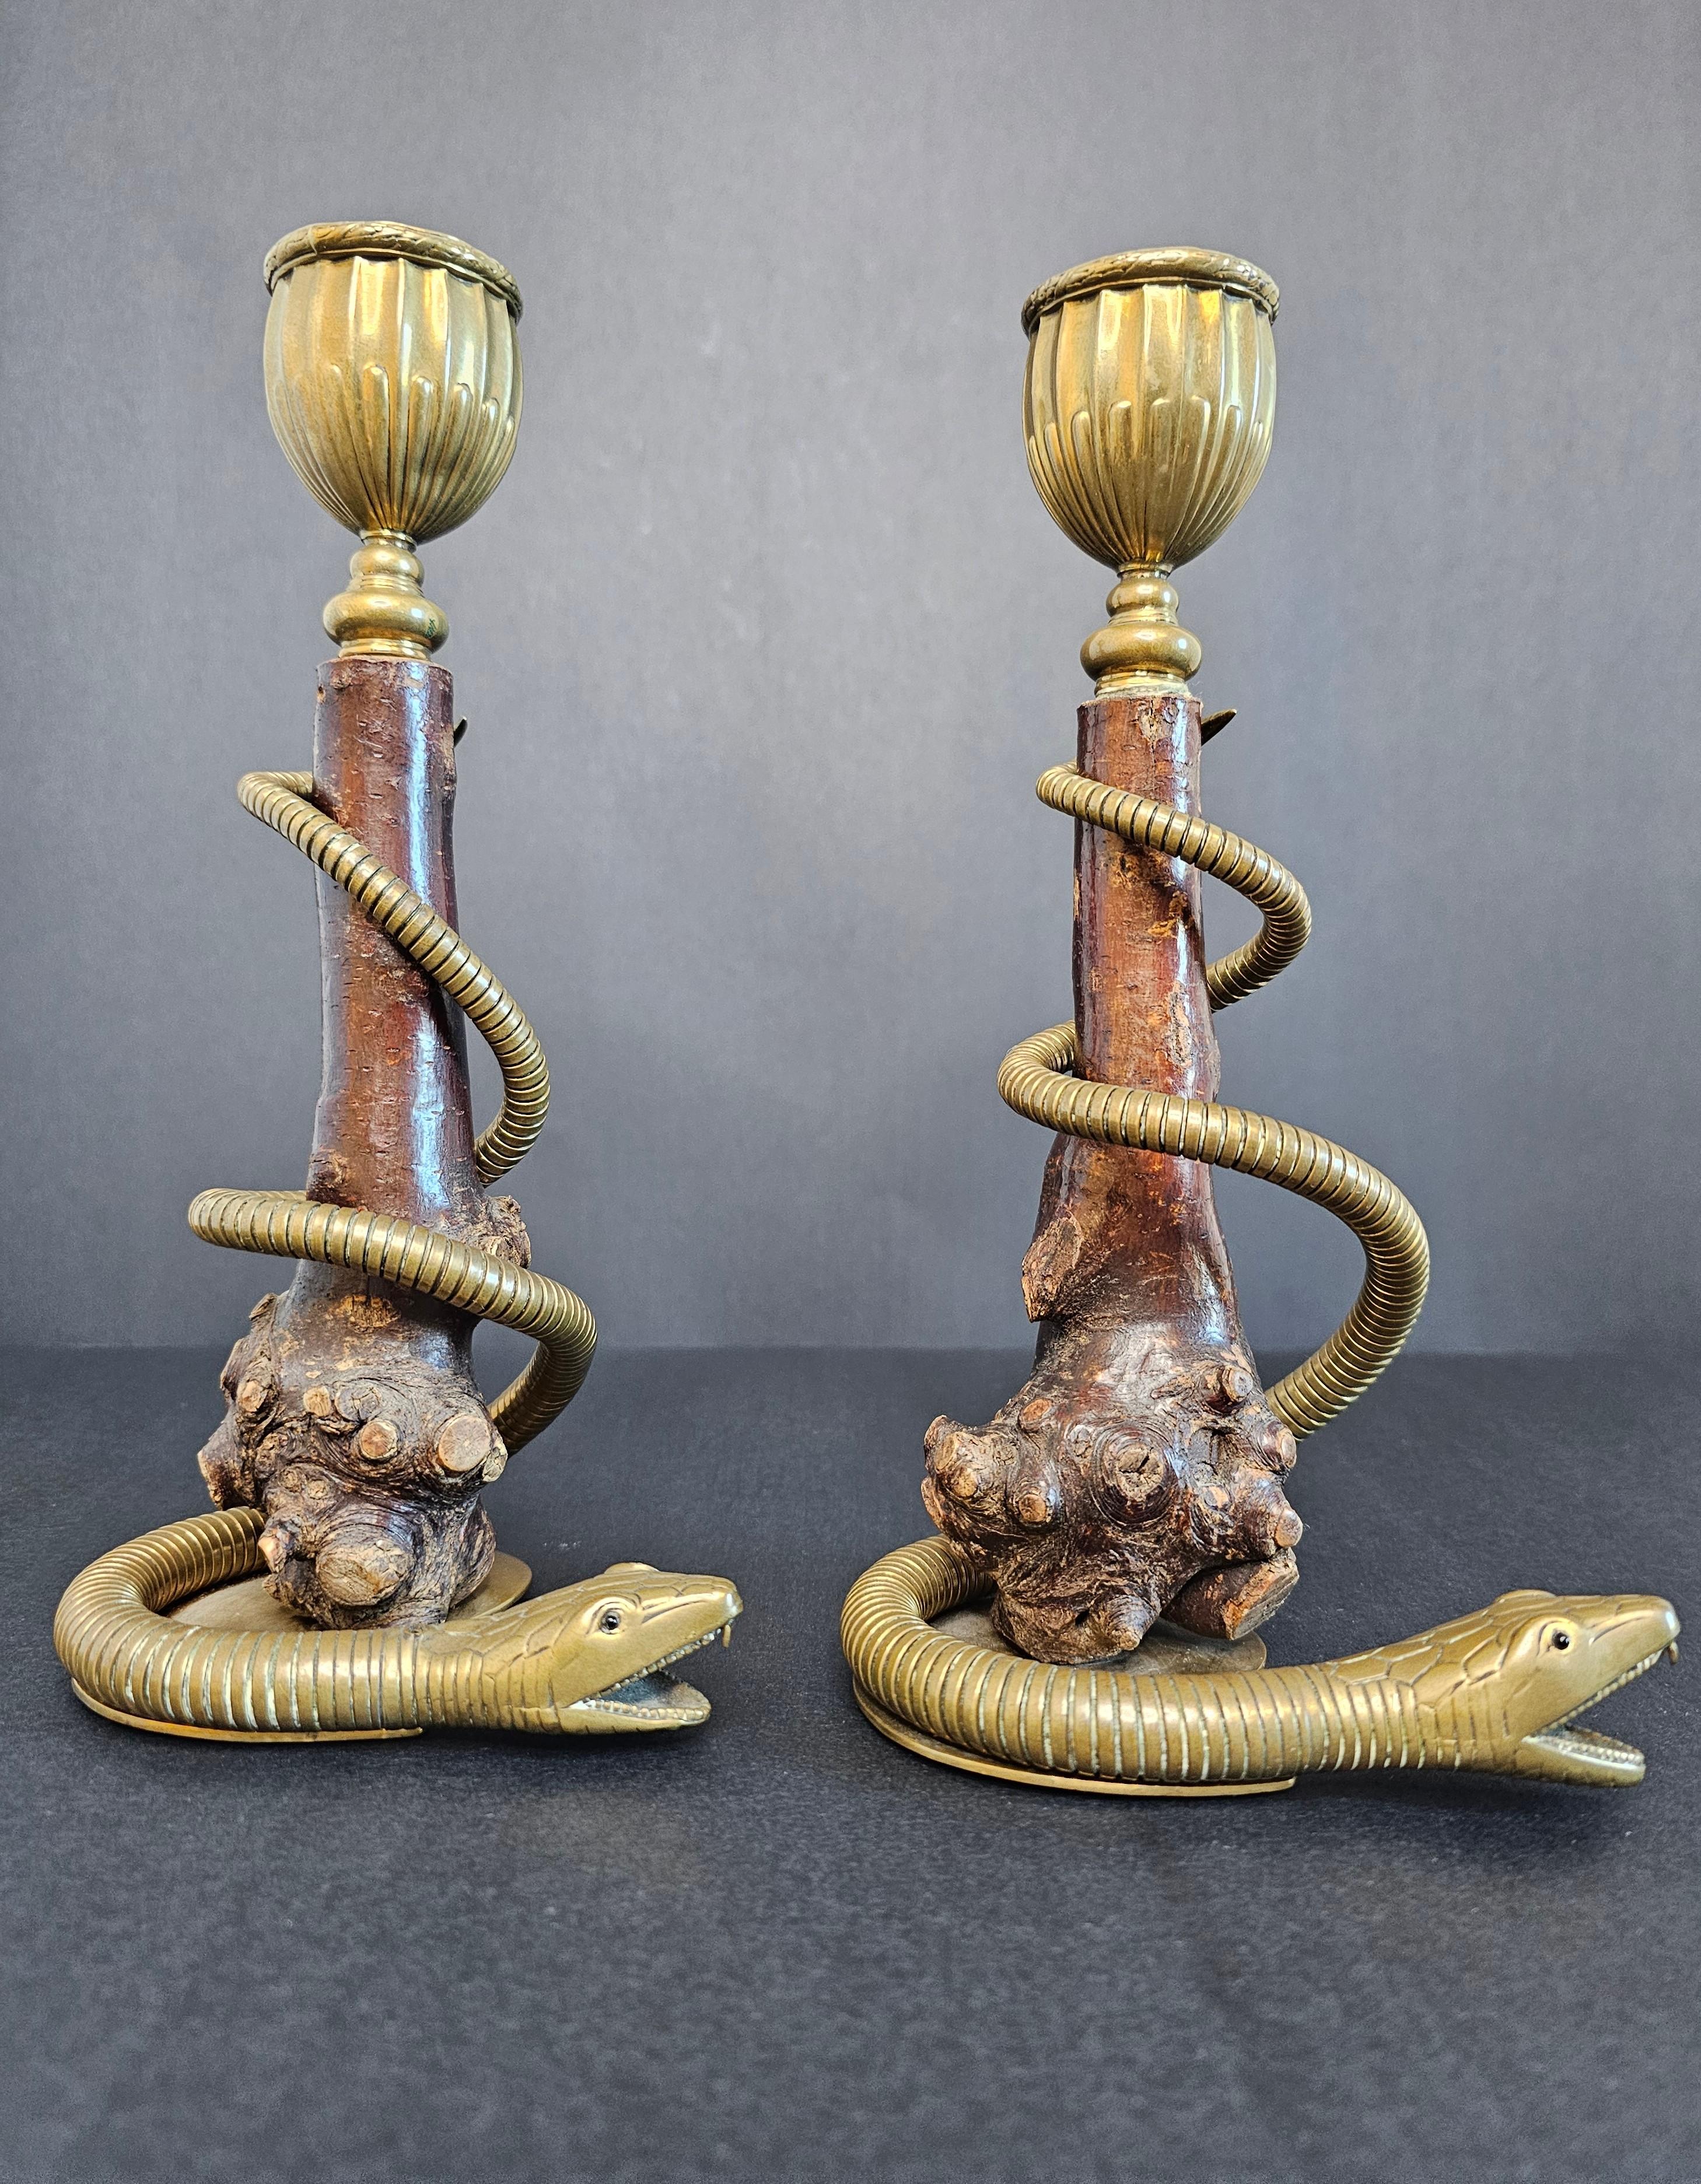 Pair of Antique Sculptural Brass Serpent Rootwood Candlesticks In Good Condition For Sale In Forney, TX